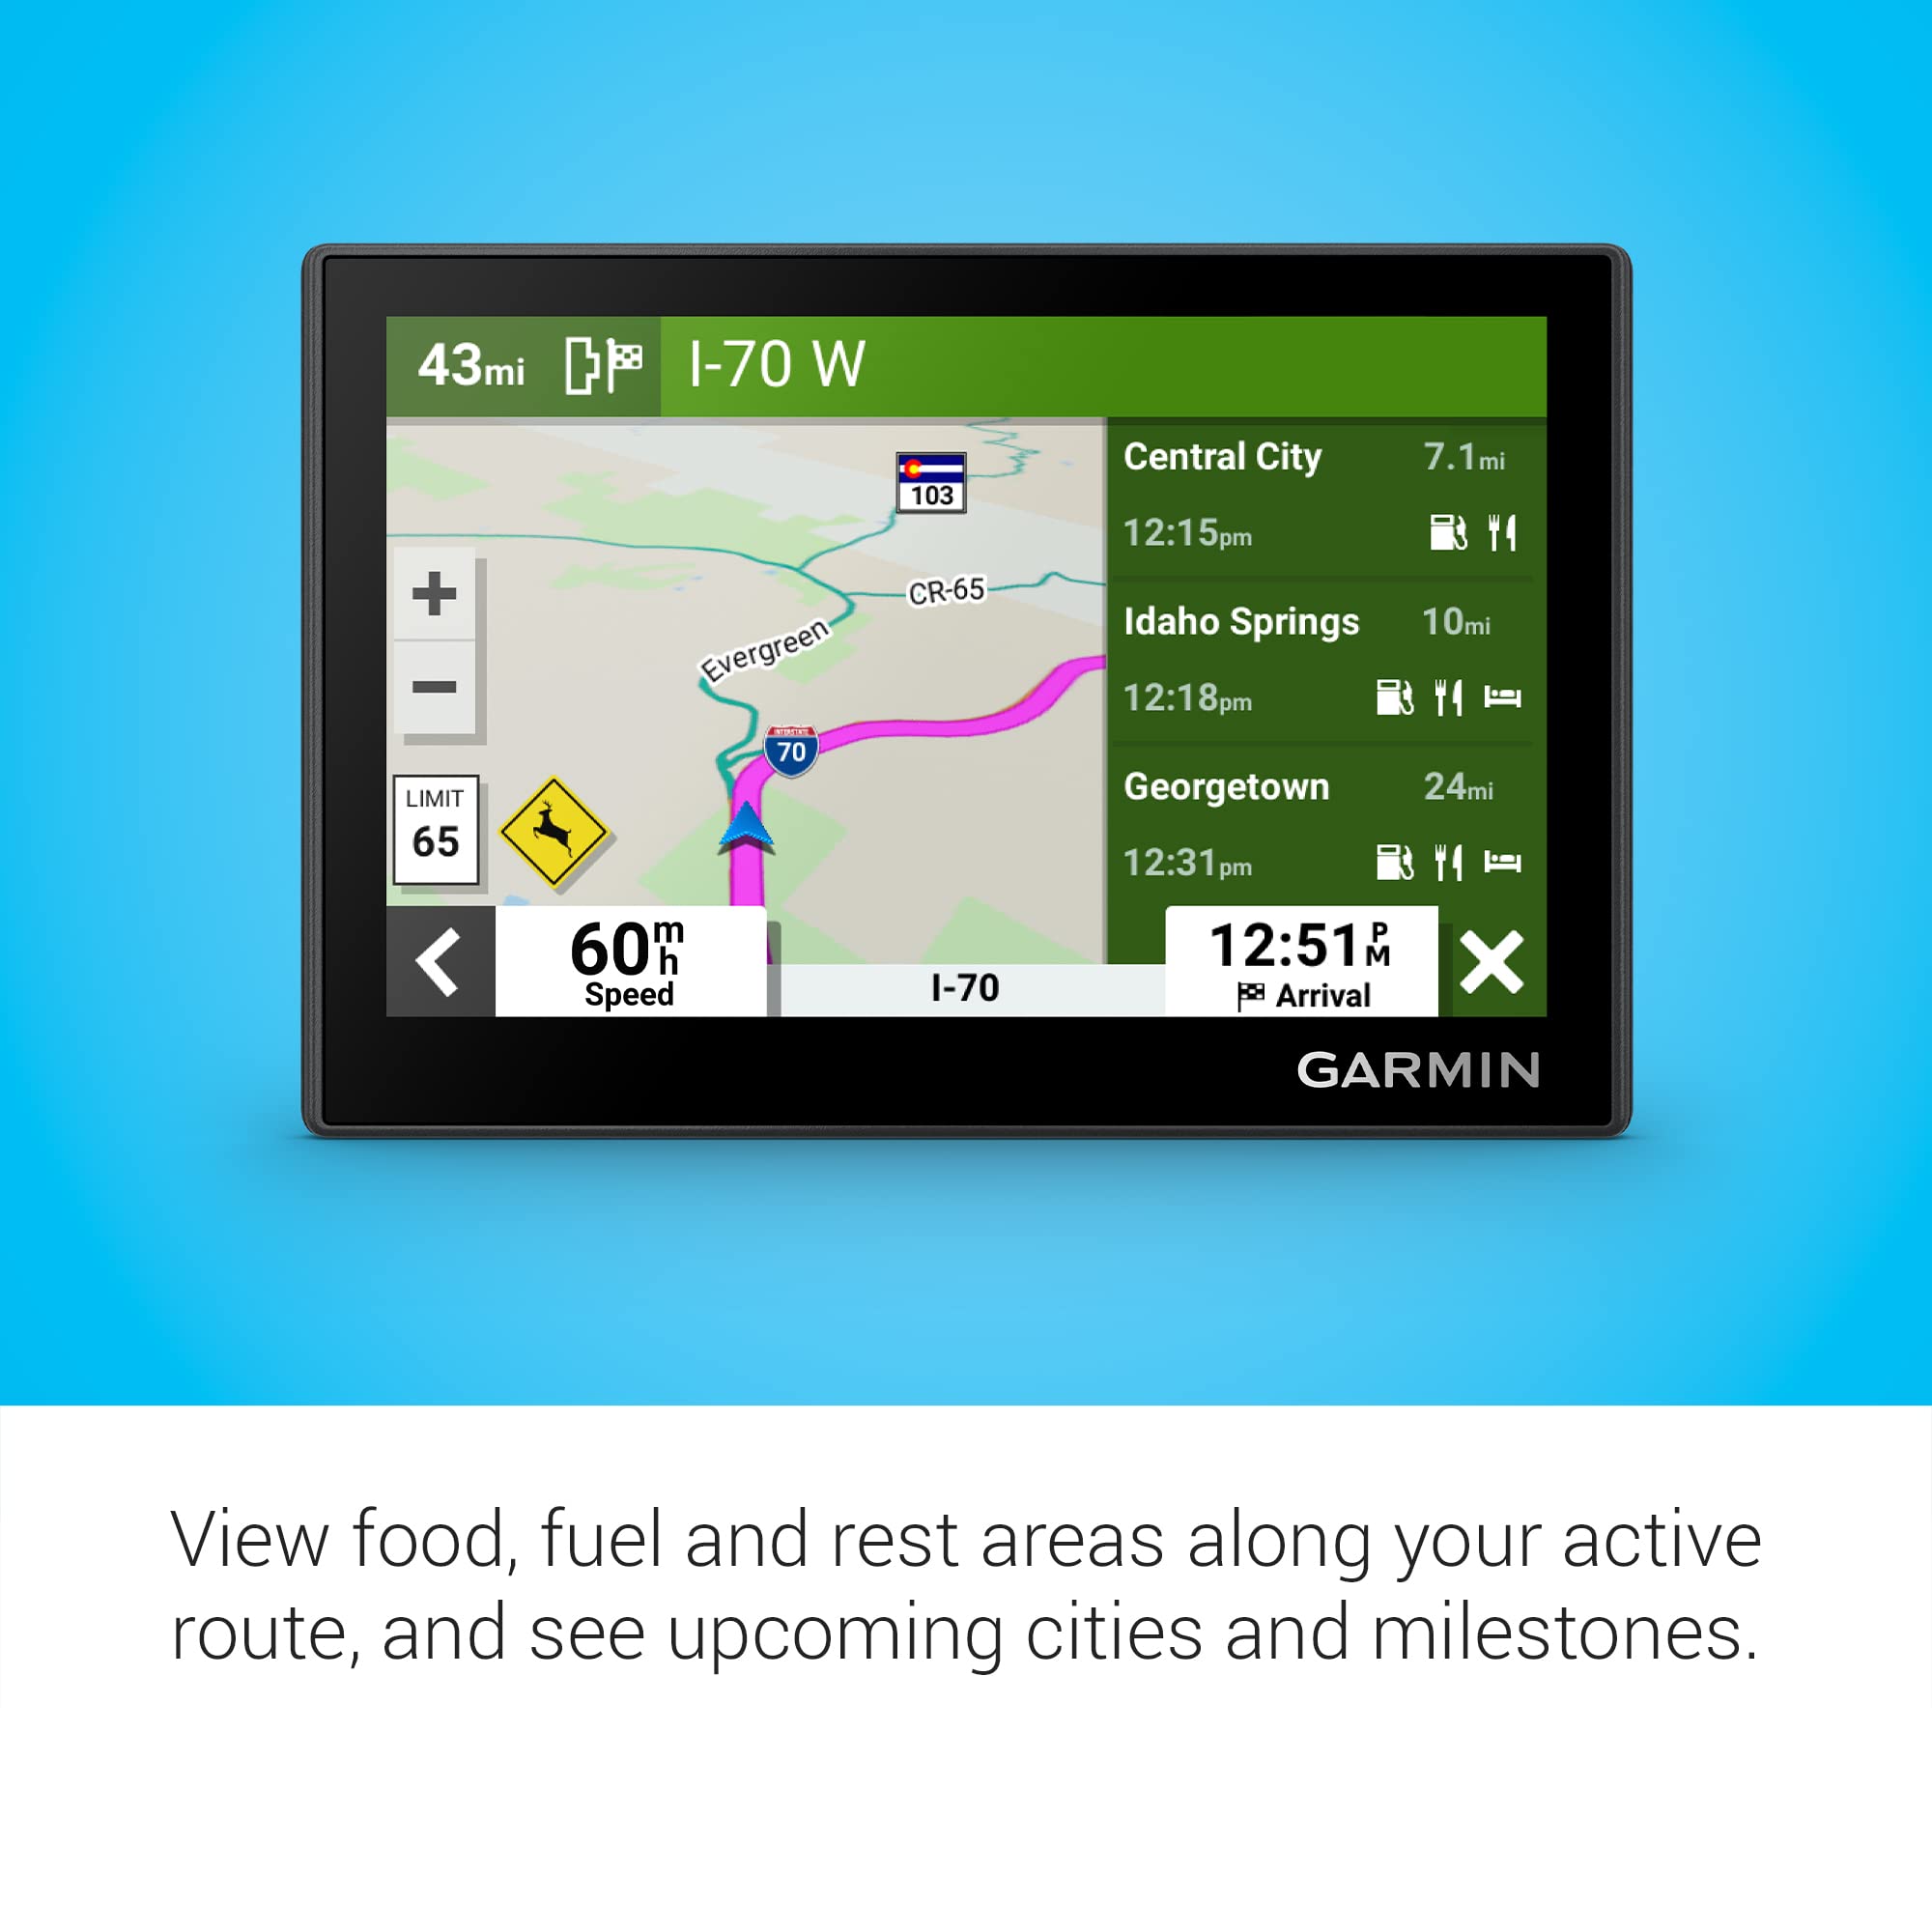 Garmin Drive™ 53 GPS Navigator, High-Resolution Touchscreen, Simple On-Screen Menus and Easy-to-See Maps, Driver Alerts